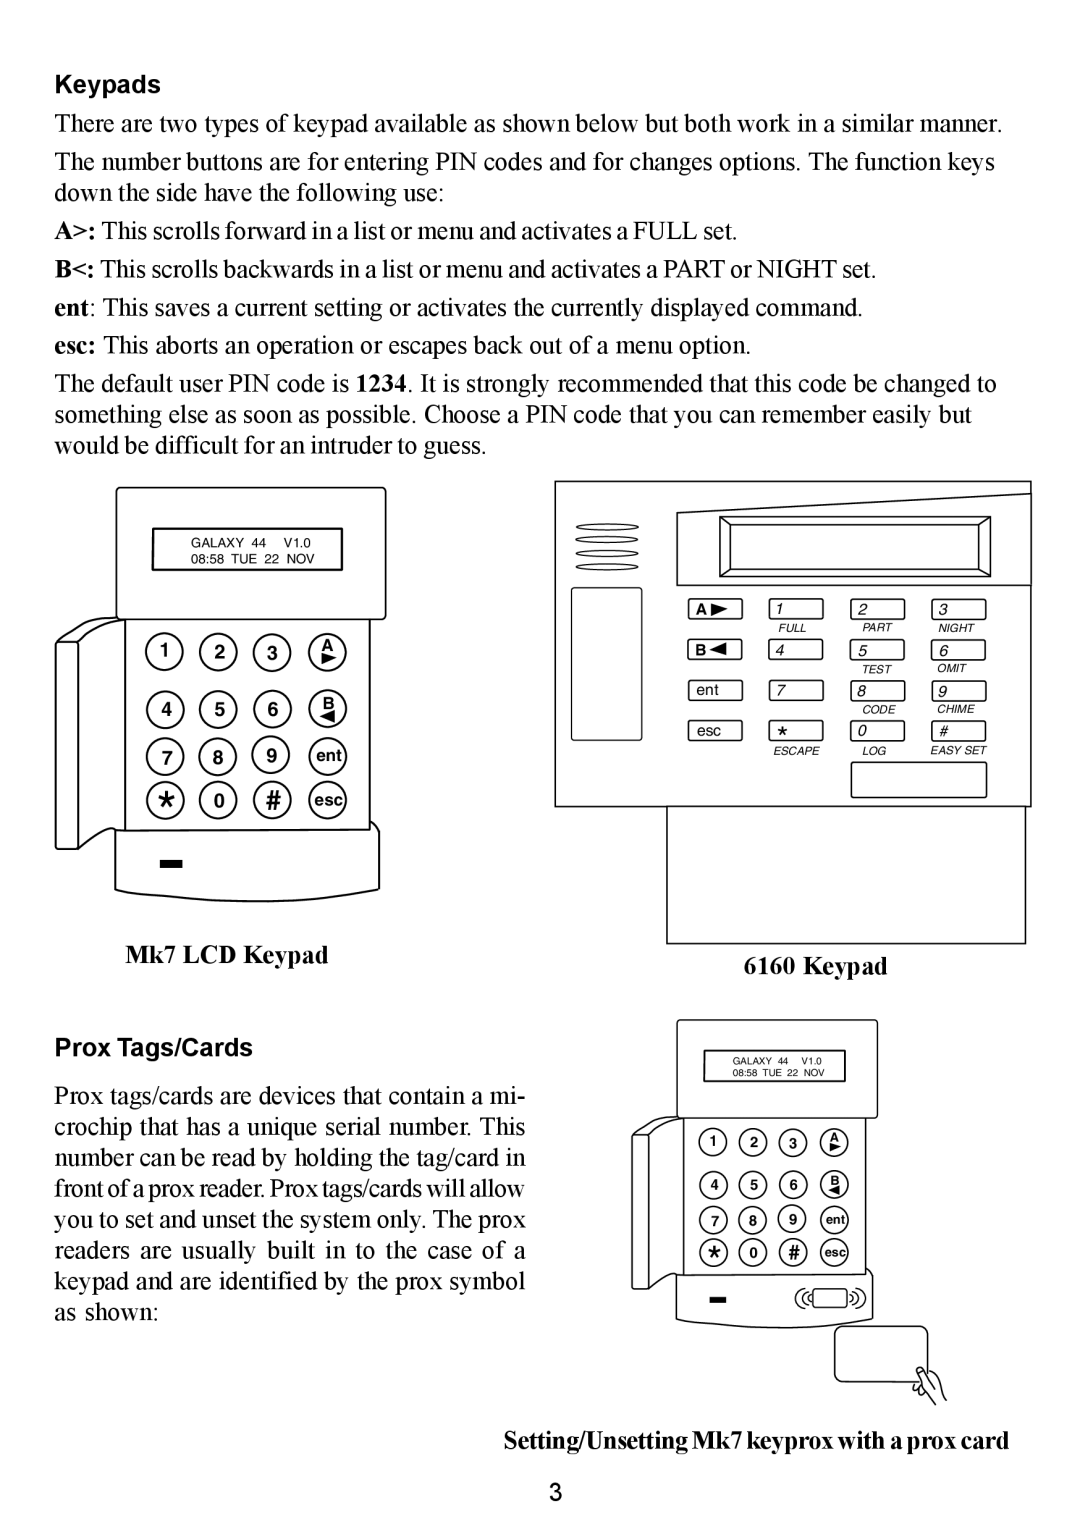 Honeywell 16103 manual Keypads, Mk7 LCD Keypad, Prox Tags/Cards, Setting/Unsetting Mk7 keyprox with a prox card 